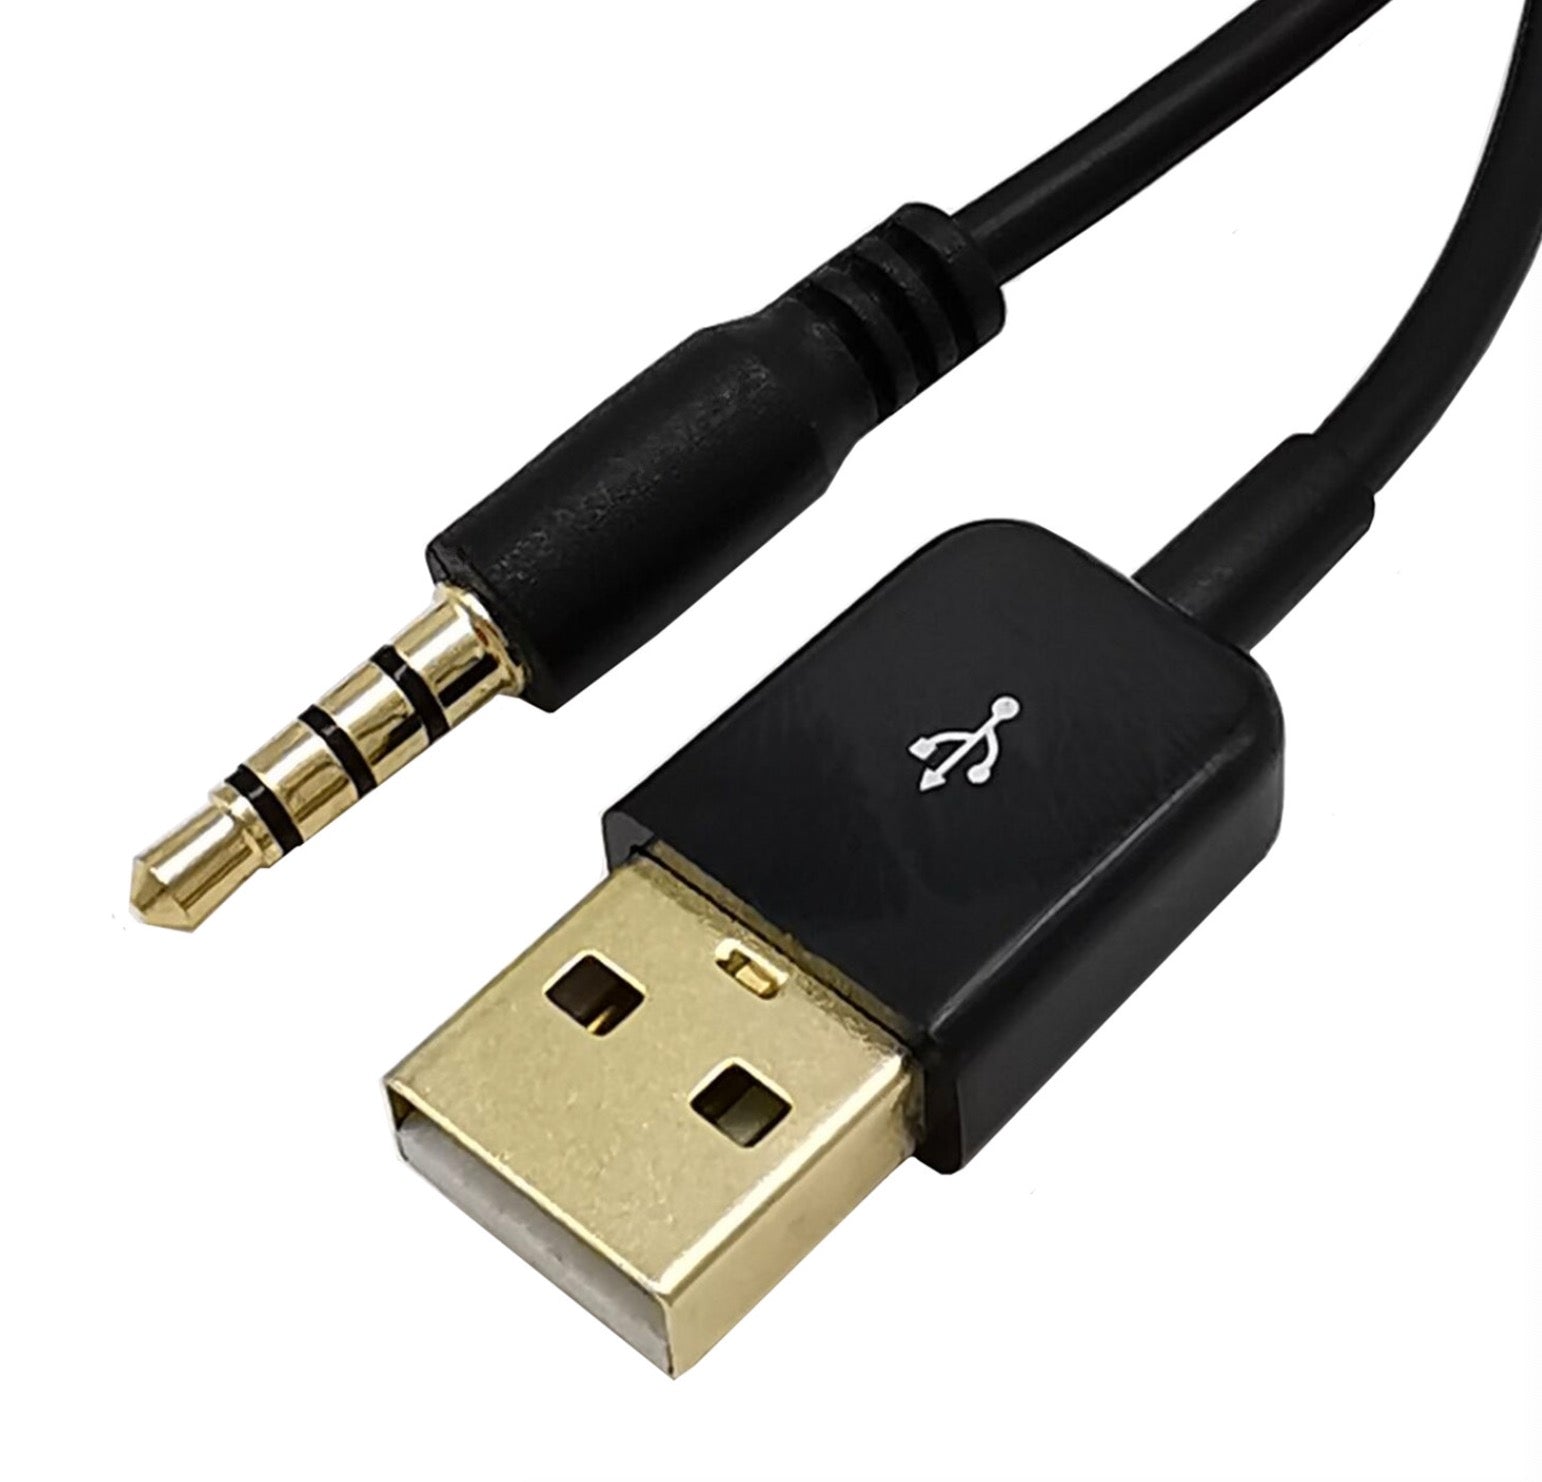 USB 2.0 to 3.5mm 4 Pole Charging Cable for MP3 MP4 Voice Recorder Speaker